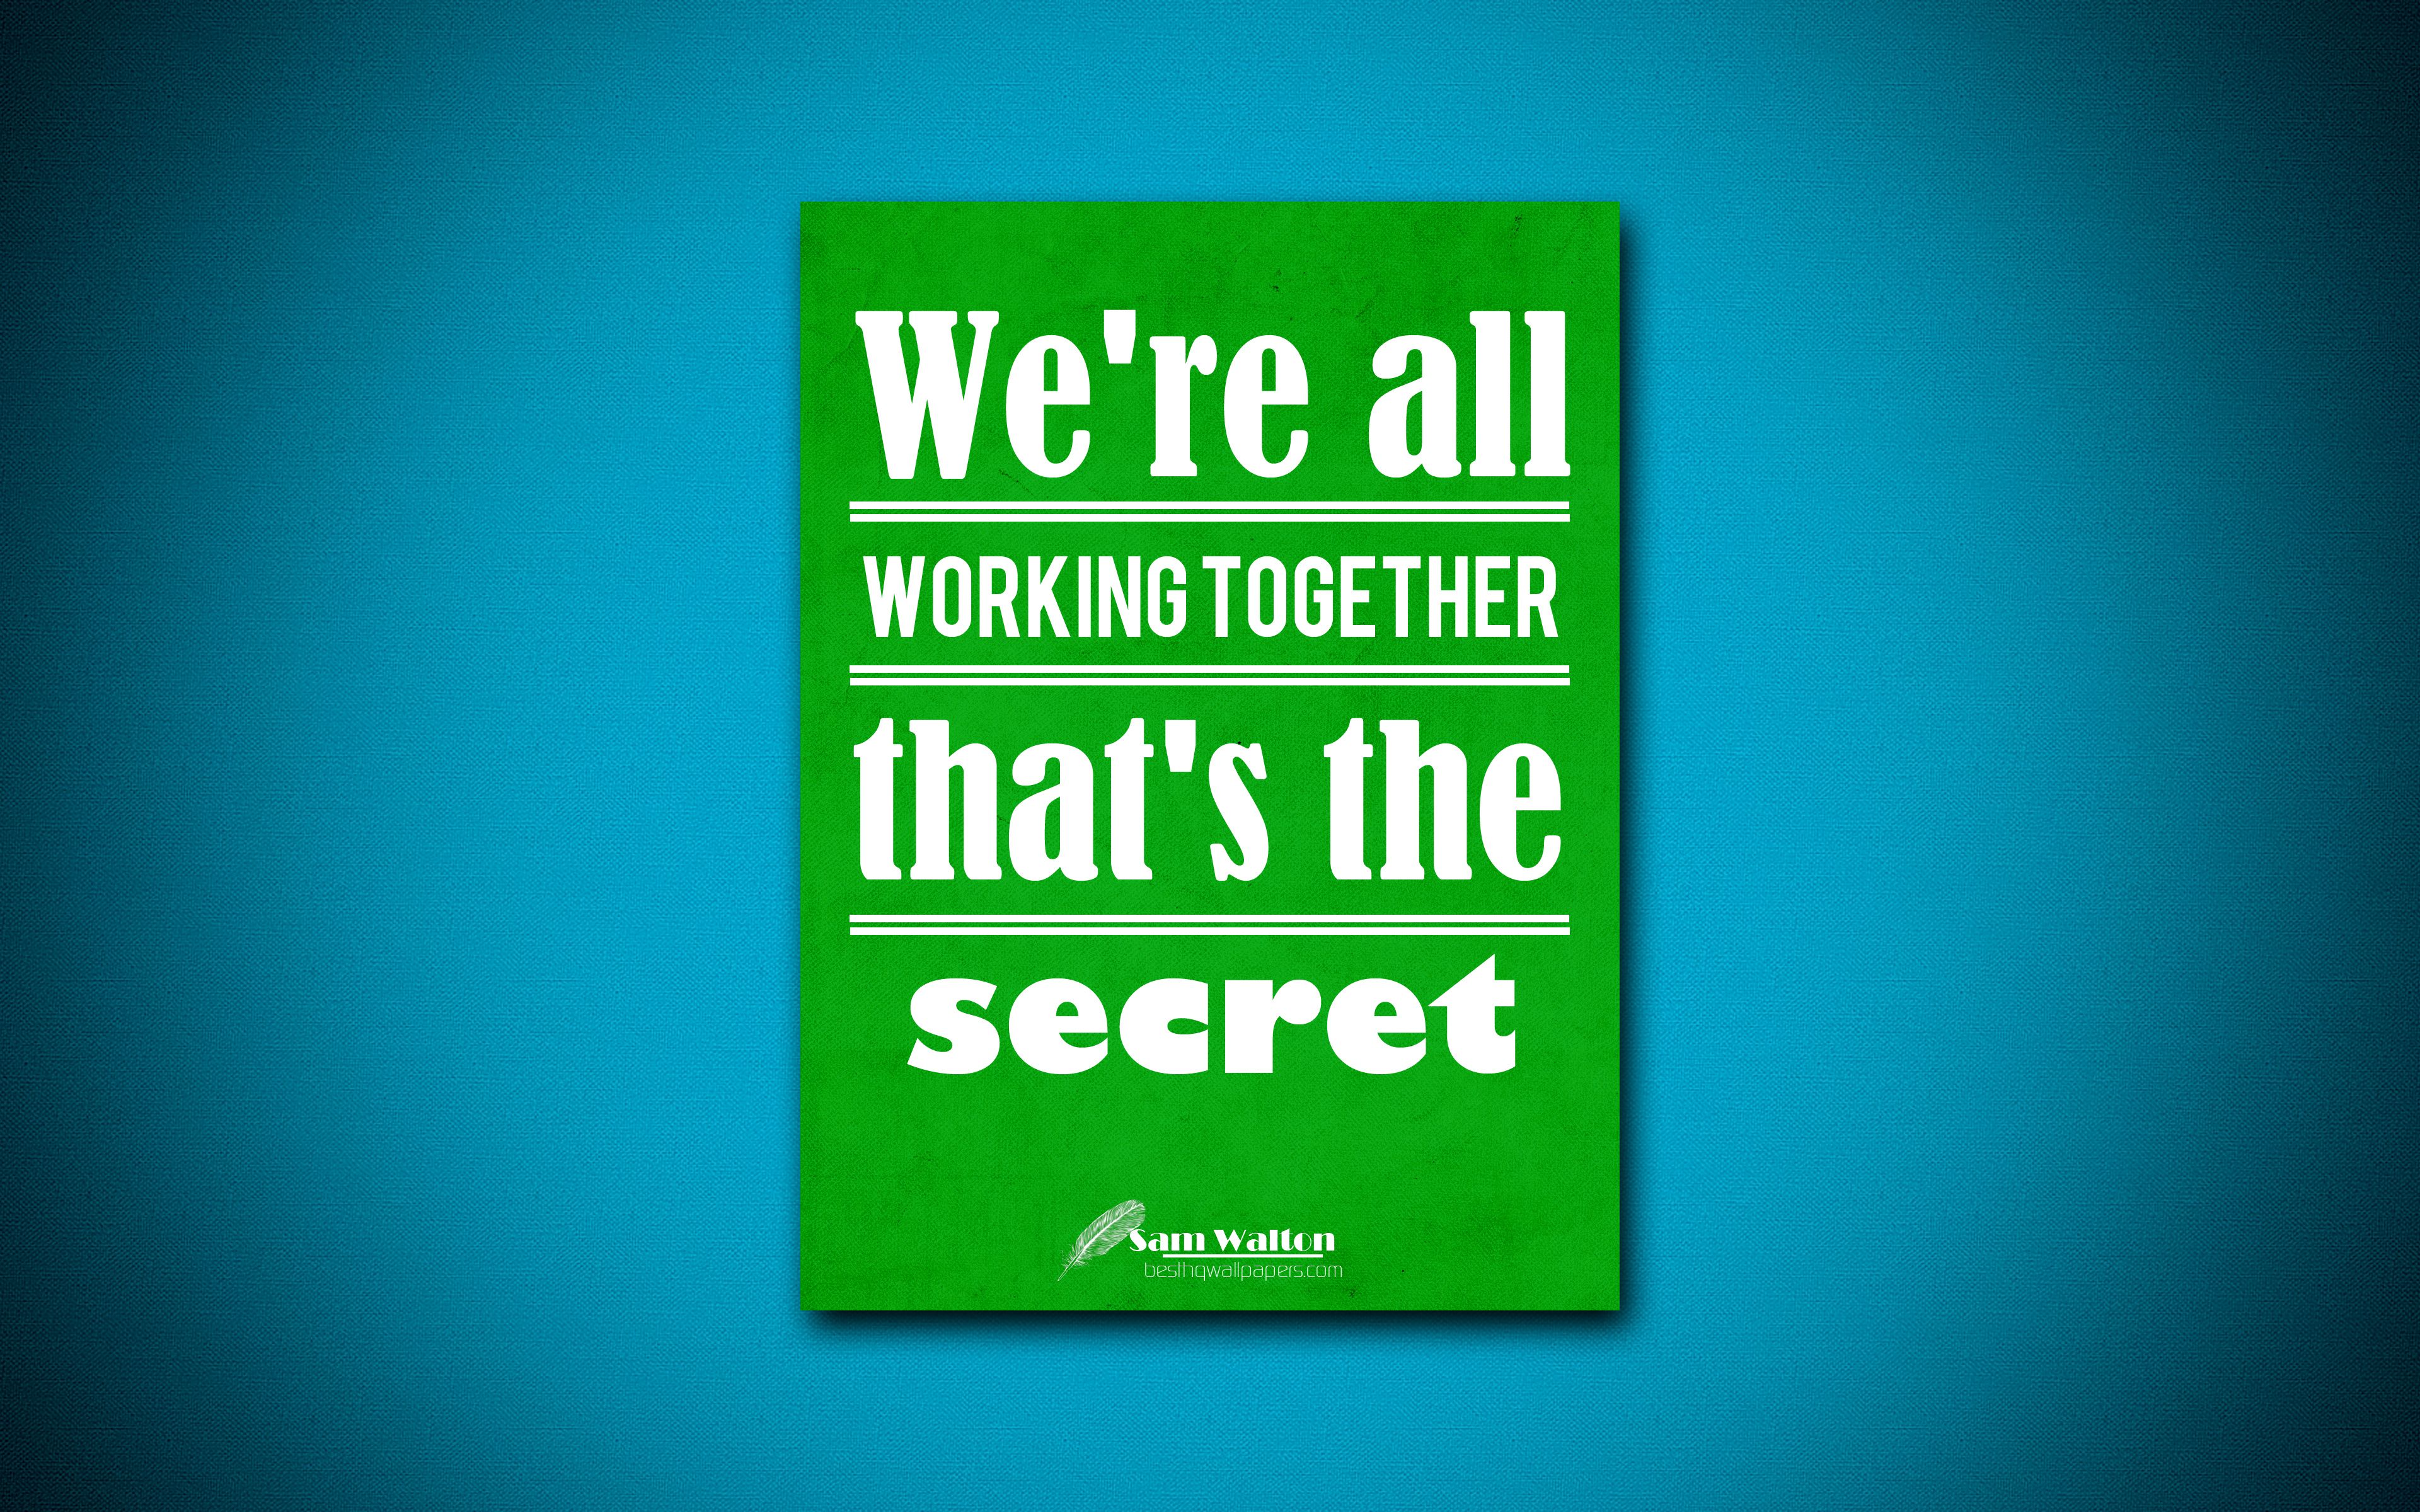 Download wallpaper We are all working together thats the secret